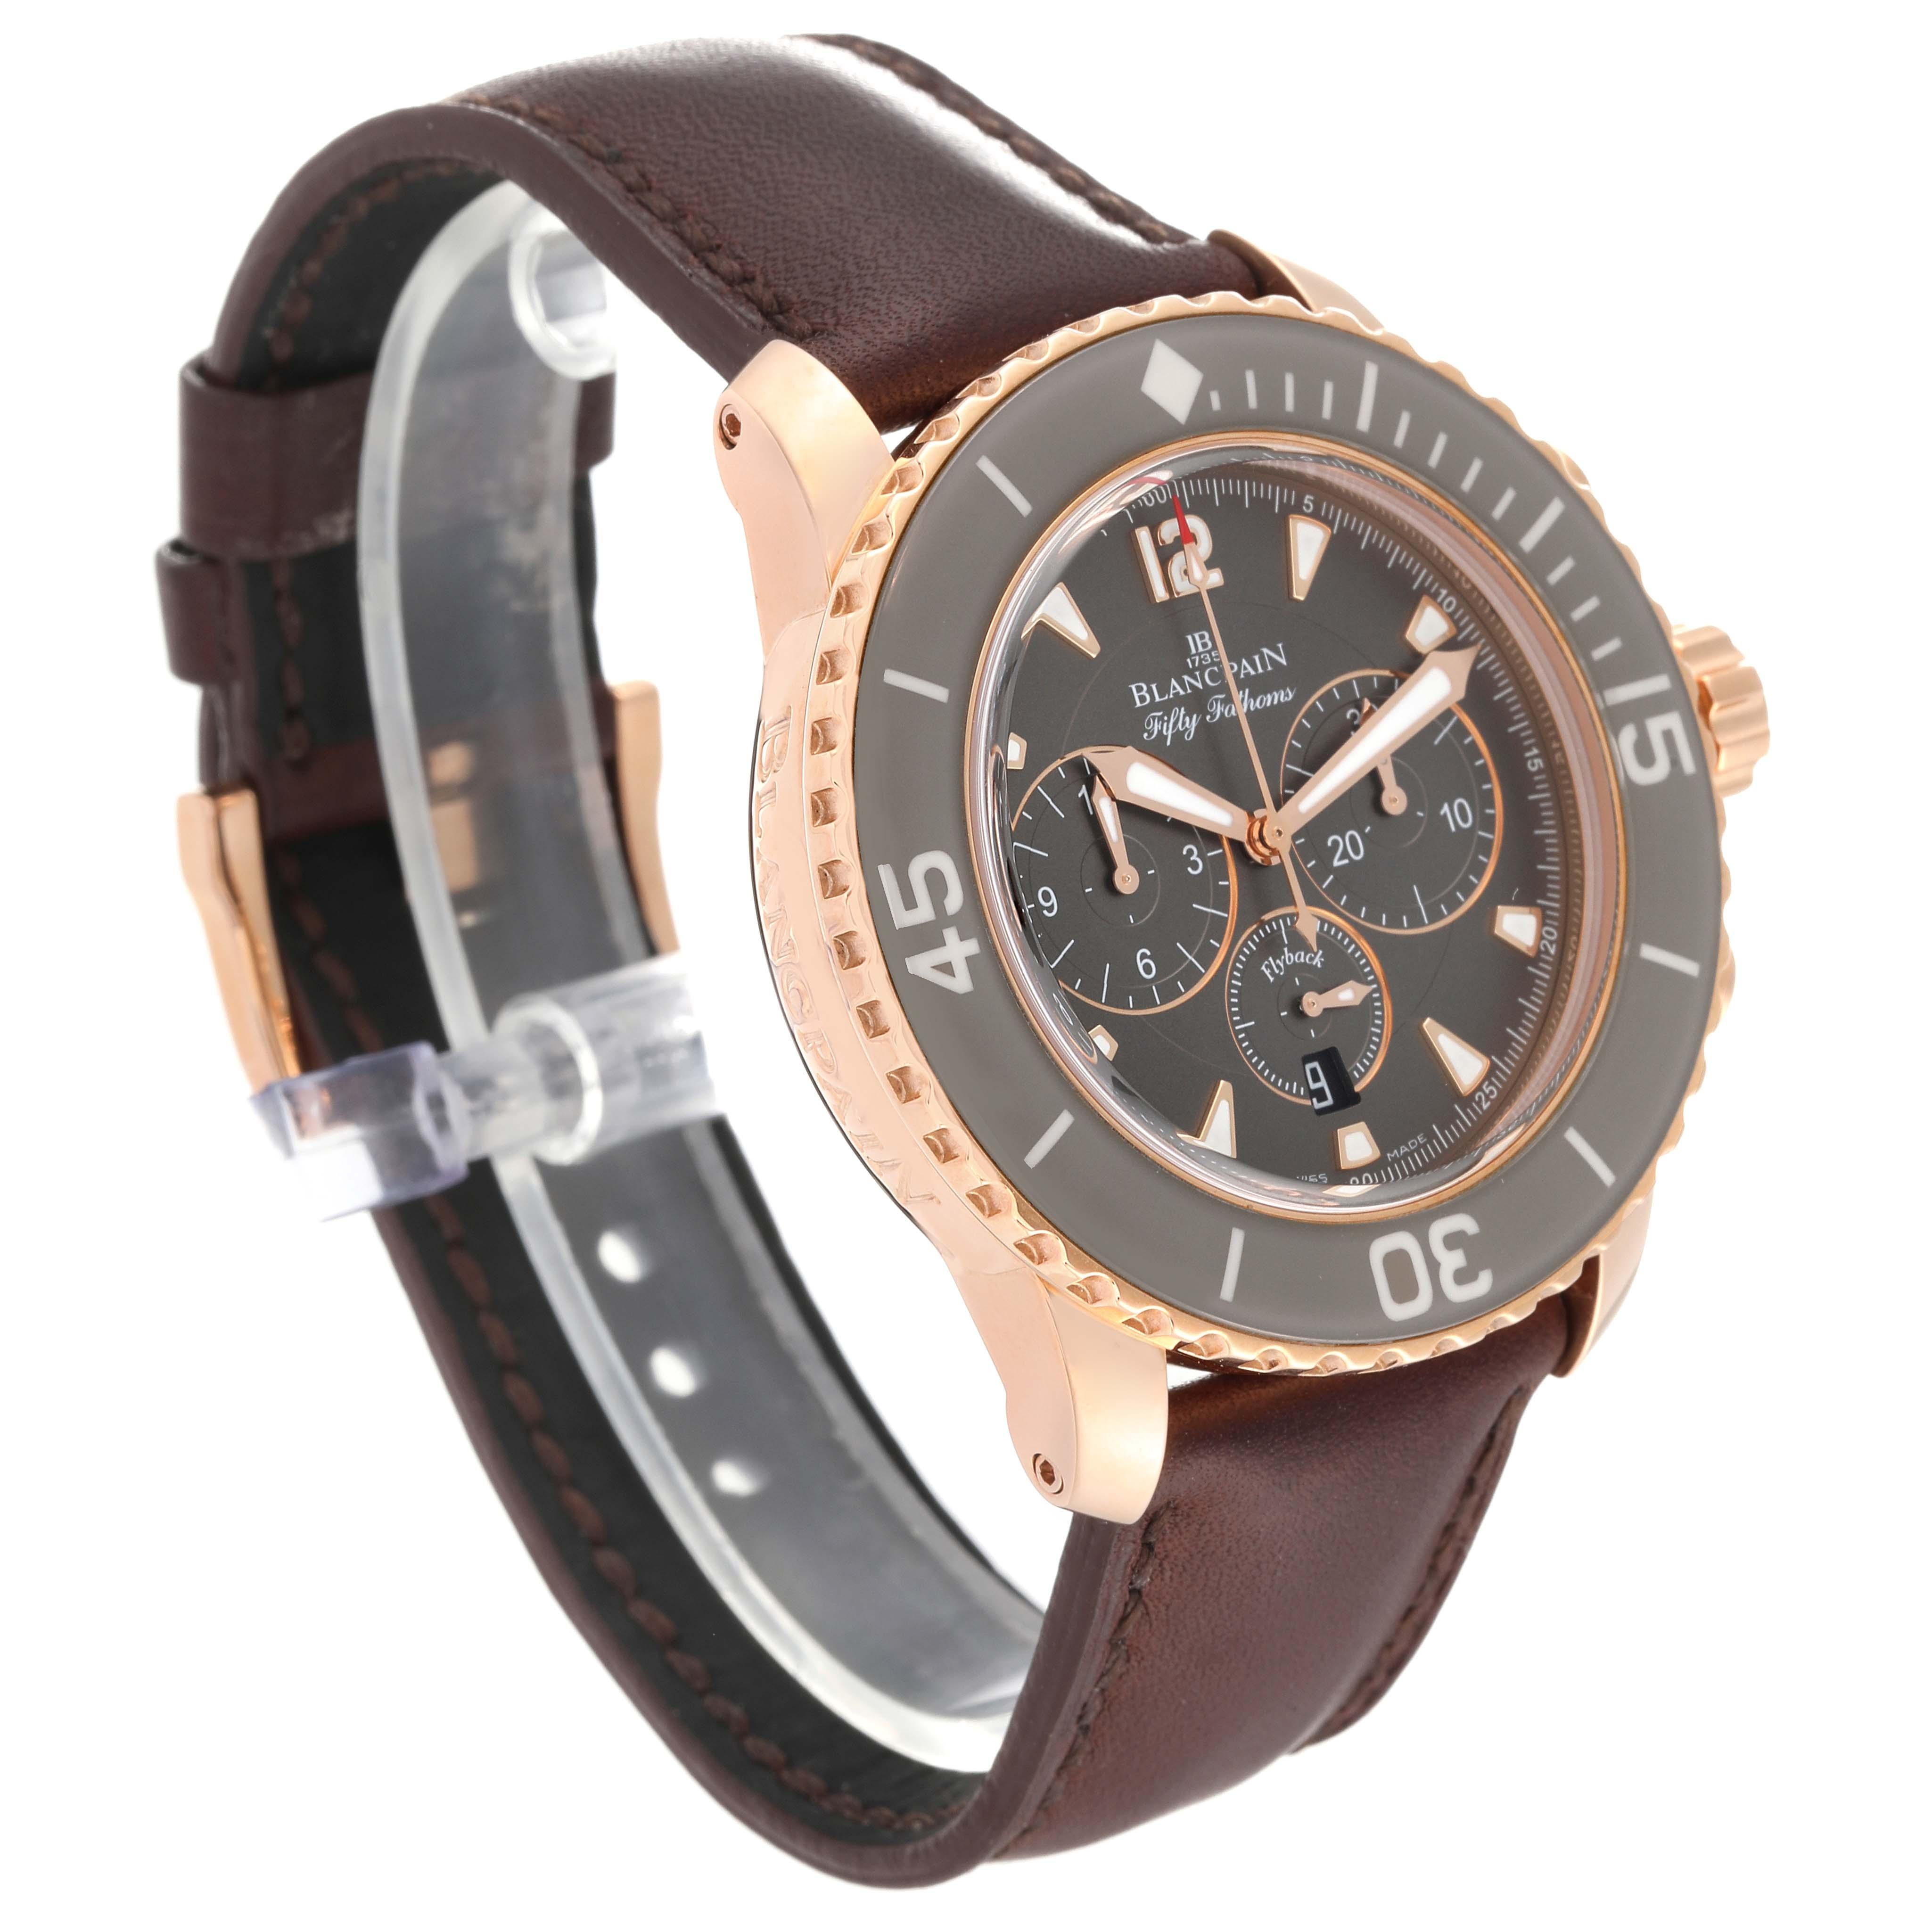 Blancpain Fifty Fathoms Flyback Rose Gold Grey Dial Mens Watch 5085F Box Card. Automatic self-winding chronograph movement. 18K rose gold case 45.0 mm in diameter. Case thickness: 15.5 mm. Exhibition transparent sapphire crystal caseback. 18k rose